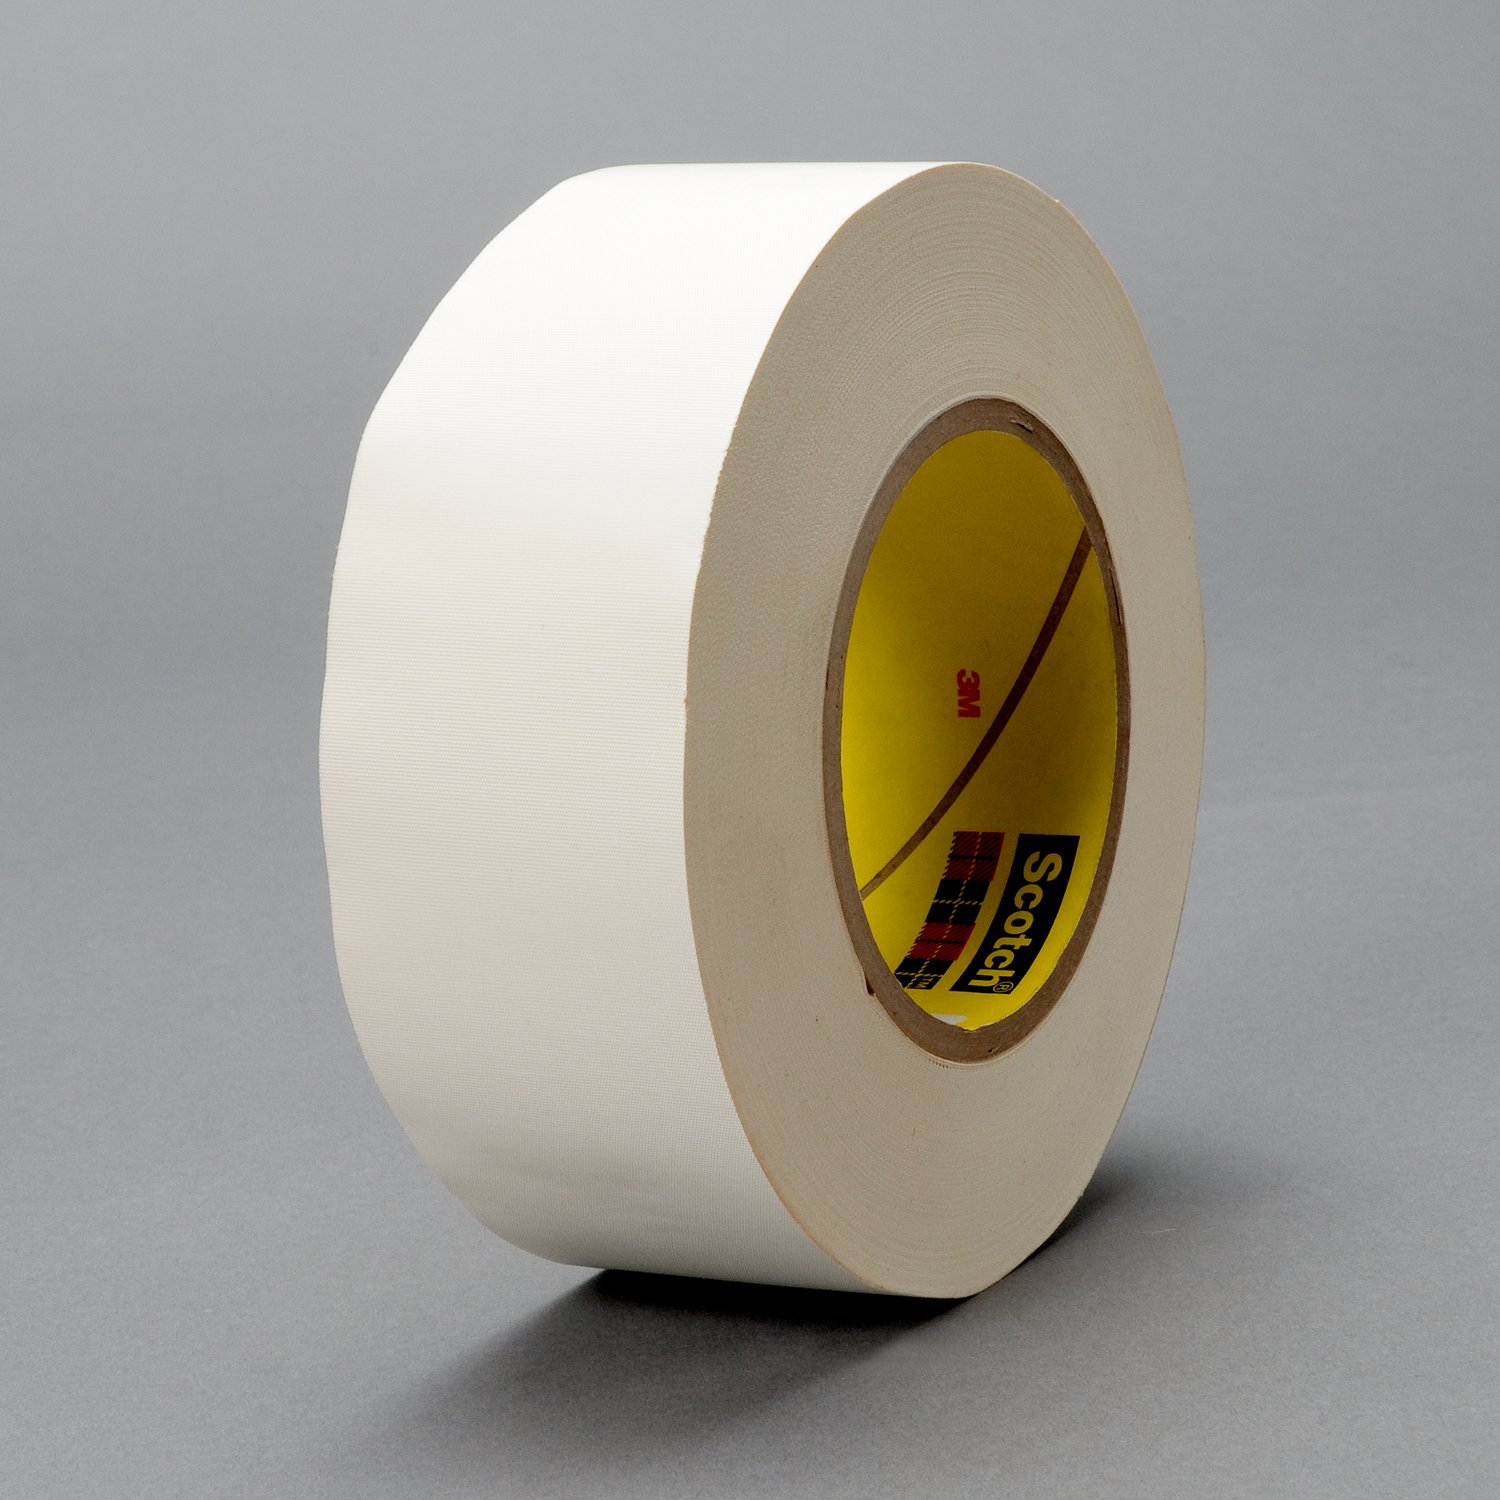 7000123431 - 3M Thermosetable Glass Cloth Tape 365, White, 1/2 in x 60 yd, 8.3 mil,
72 rolls per case